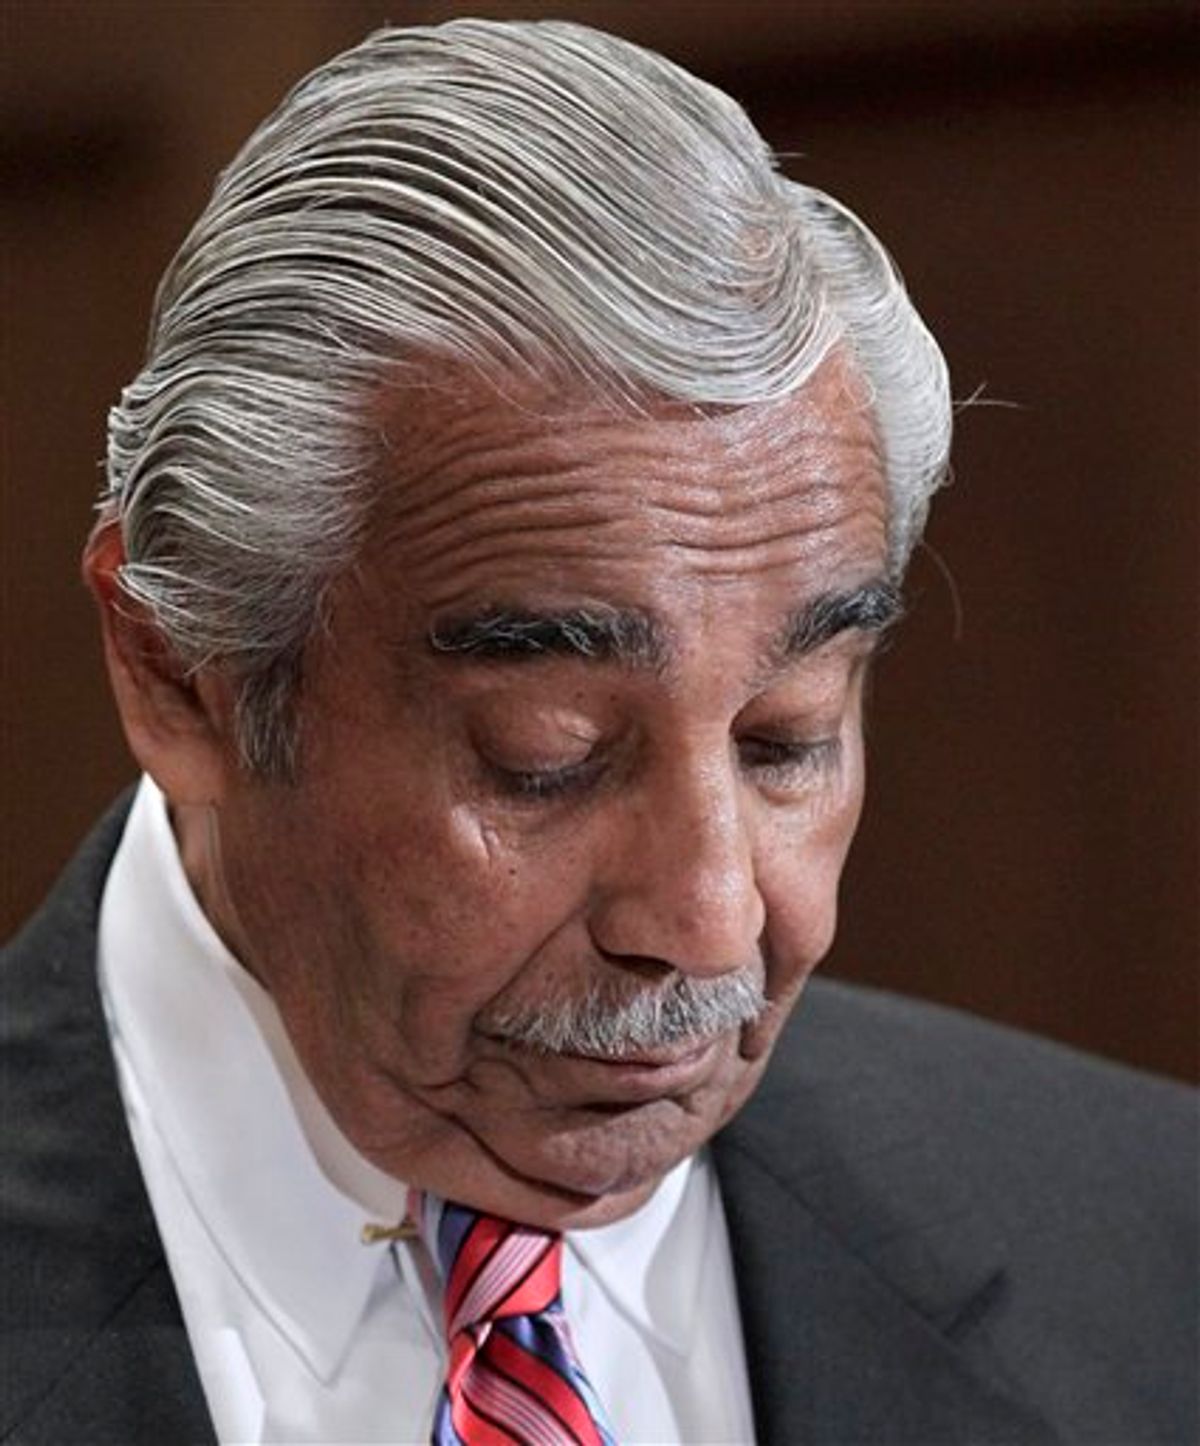 Rep. Charlie Rangel, D-N.Y., appears  on Capitol Hill in Washington, Monday, Nov. 15, 2010, before the House Committee on Standards of Official Conduct hearing as he faces 13 charges of violating House ethics rules. (AP Photo/J. Scott Applewhite) (AP)